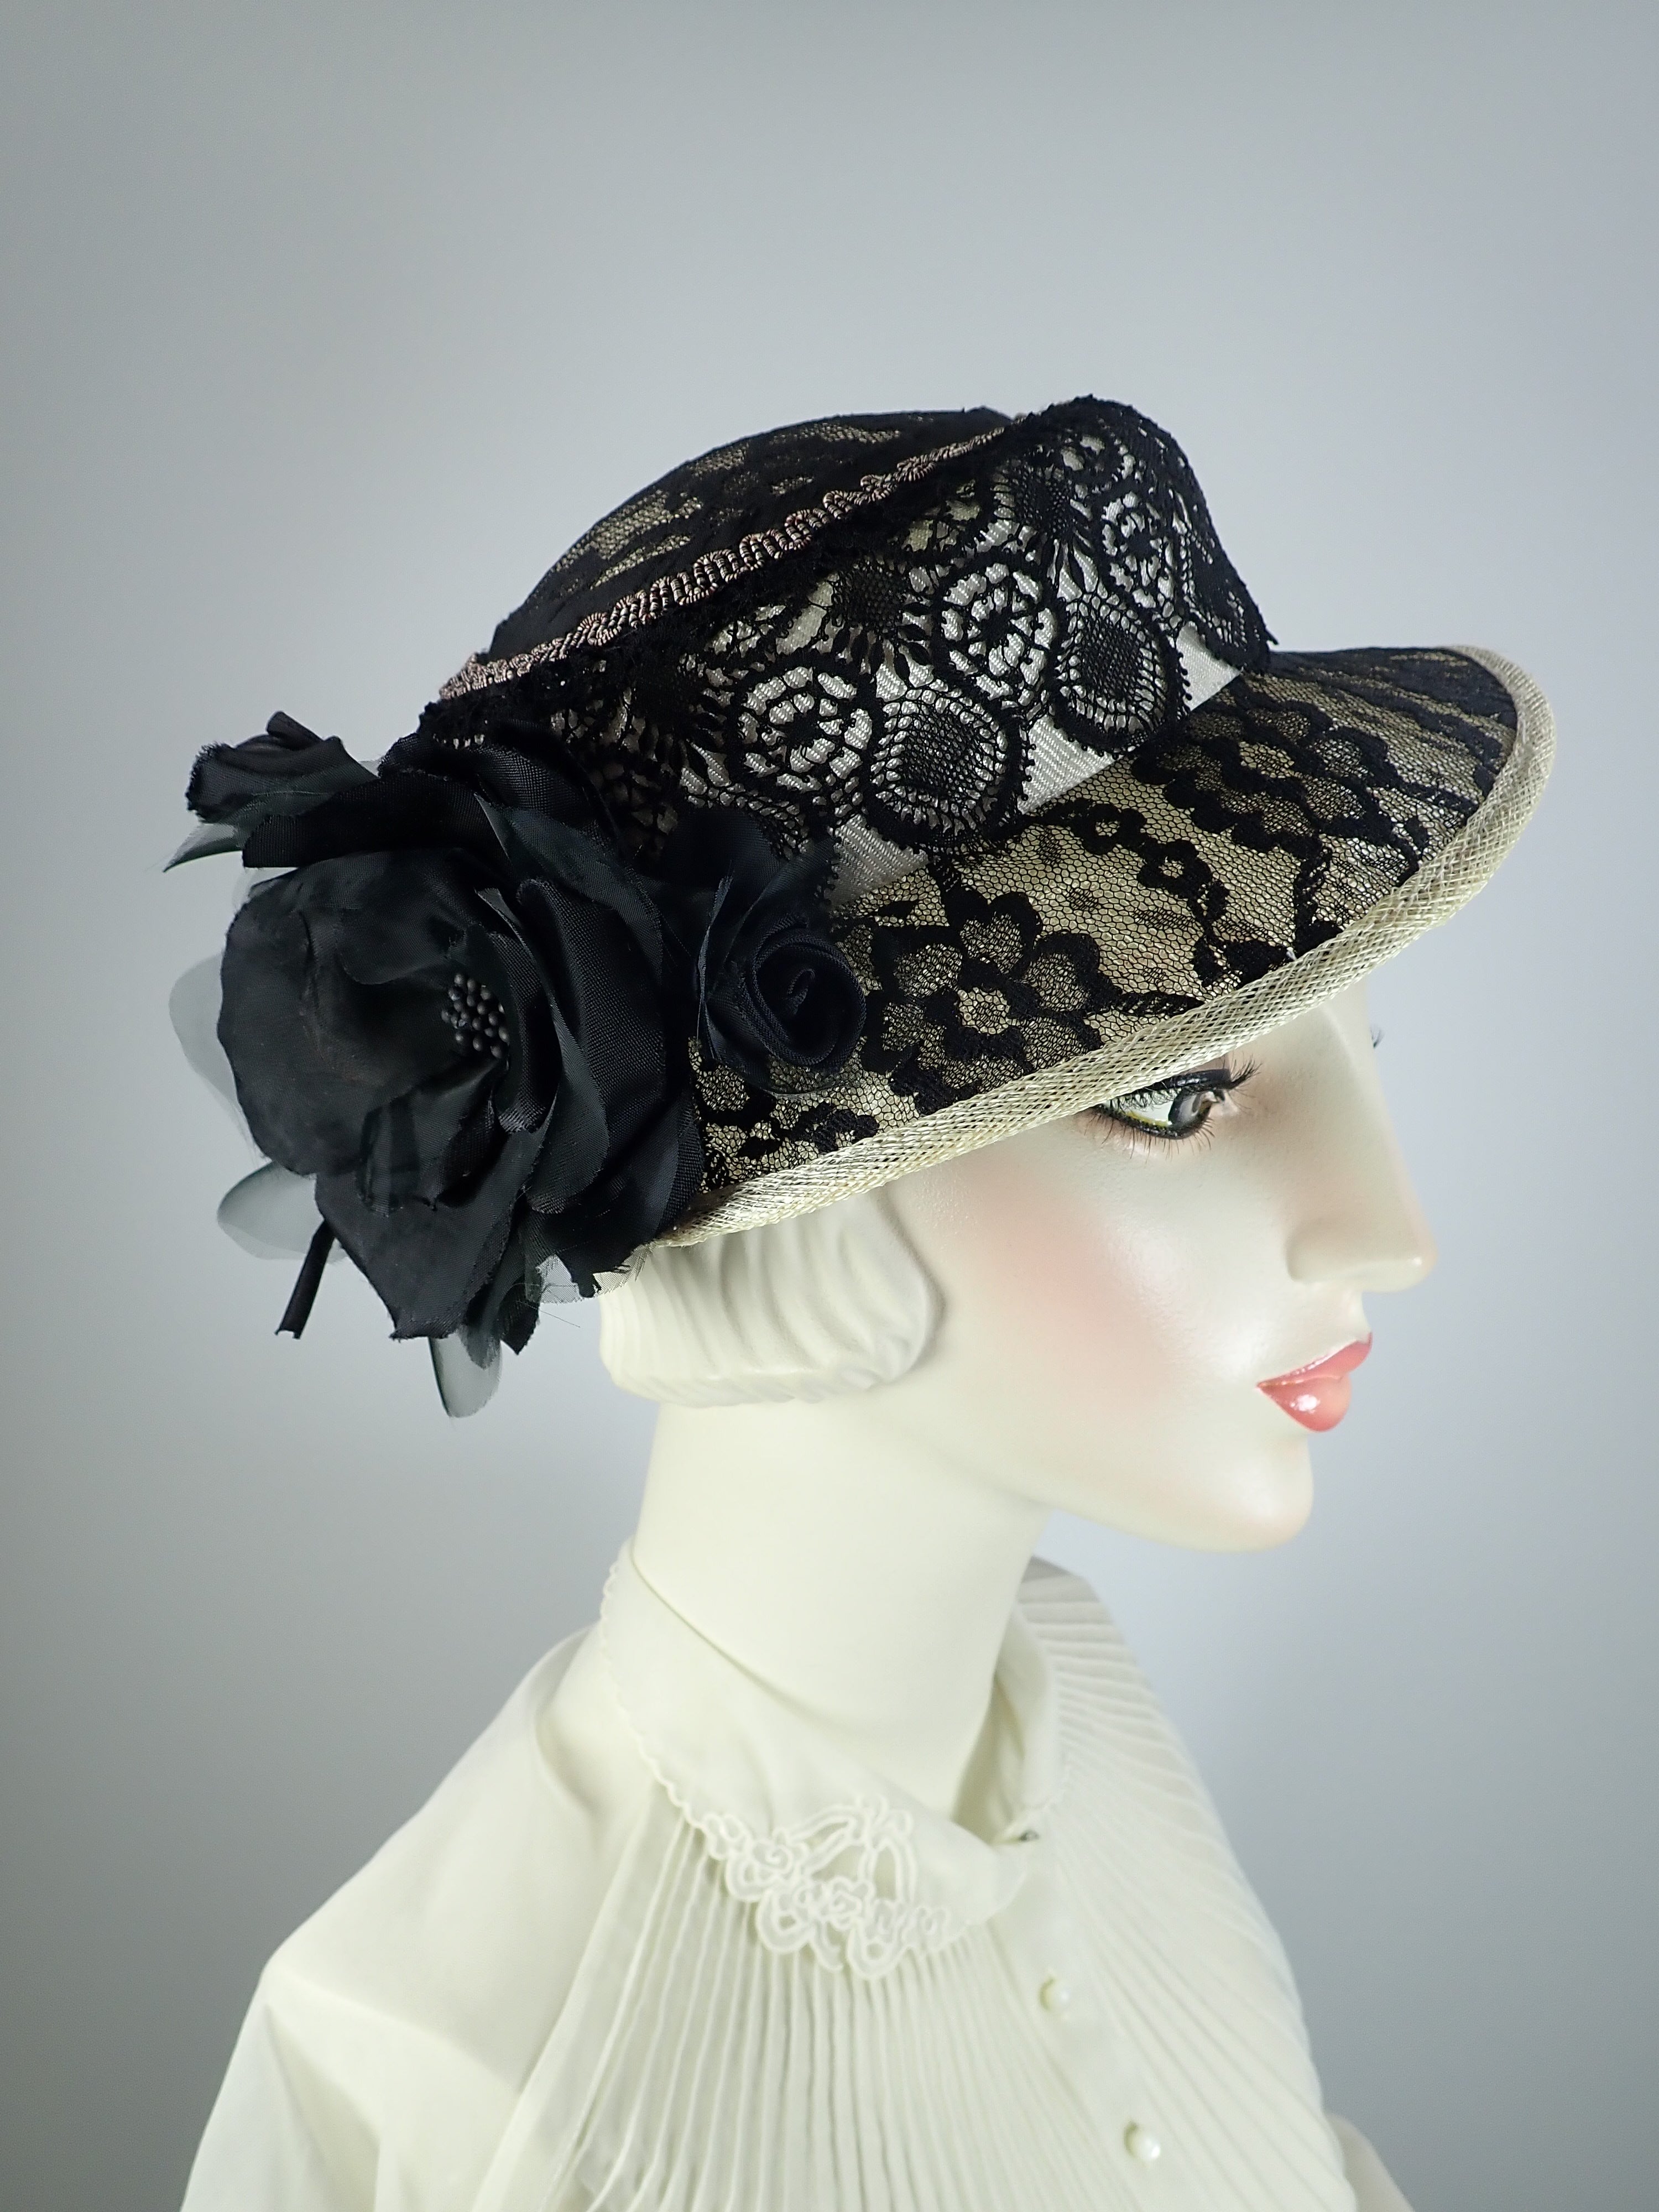 Womens Derby Hat, Black white Hat, Black lace sinamay Straw hat, Summe –  What a Great Hat